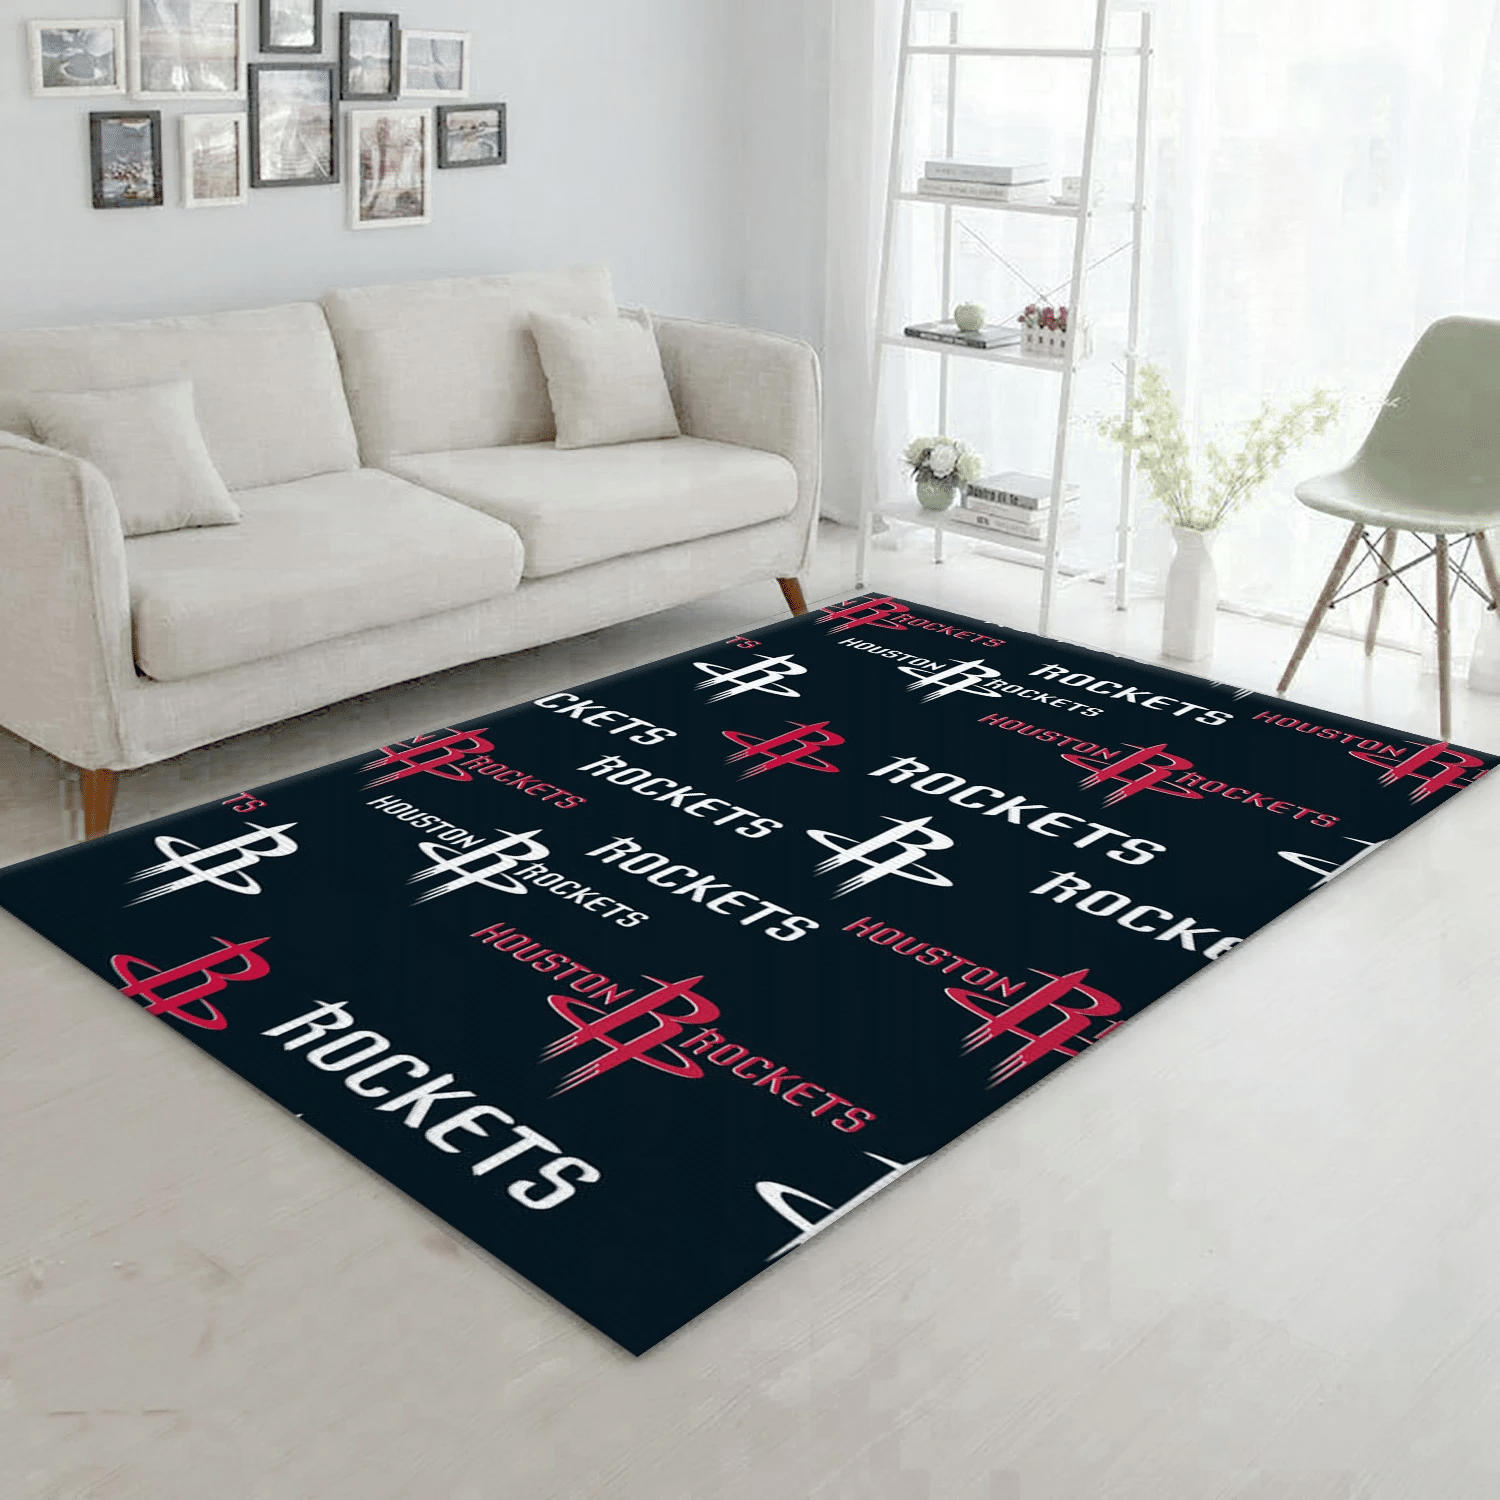 Houston Rockets Patterns 1 Reangle Area Rug, Living Room Rug - Home Decor - Indoor Outdoor Rugs 3